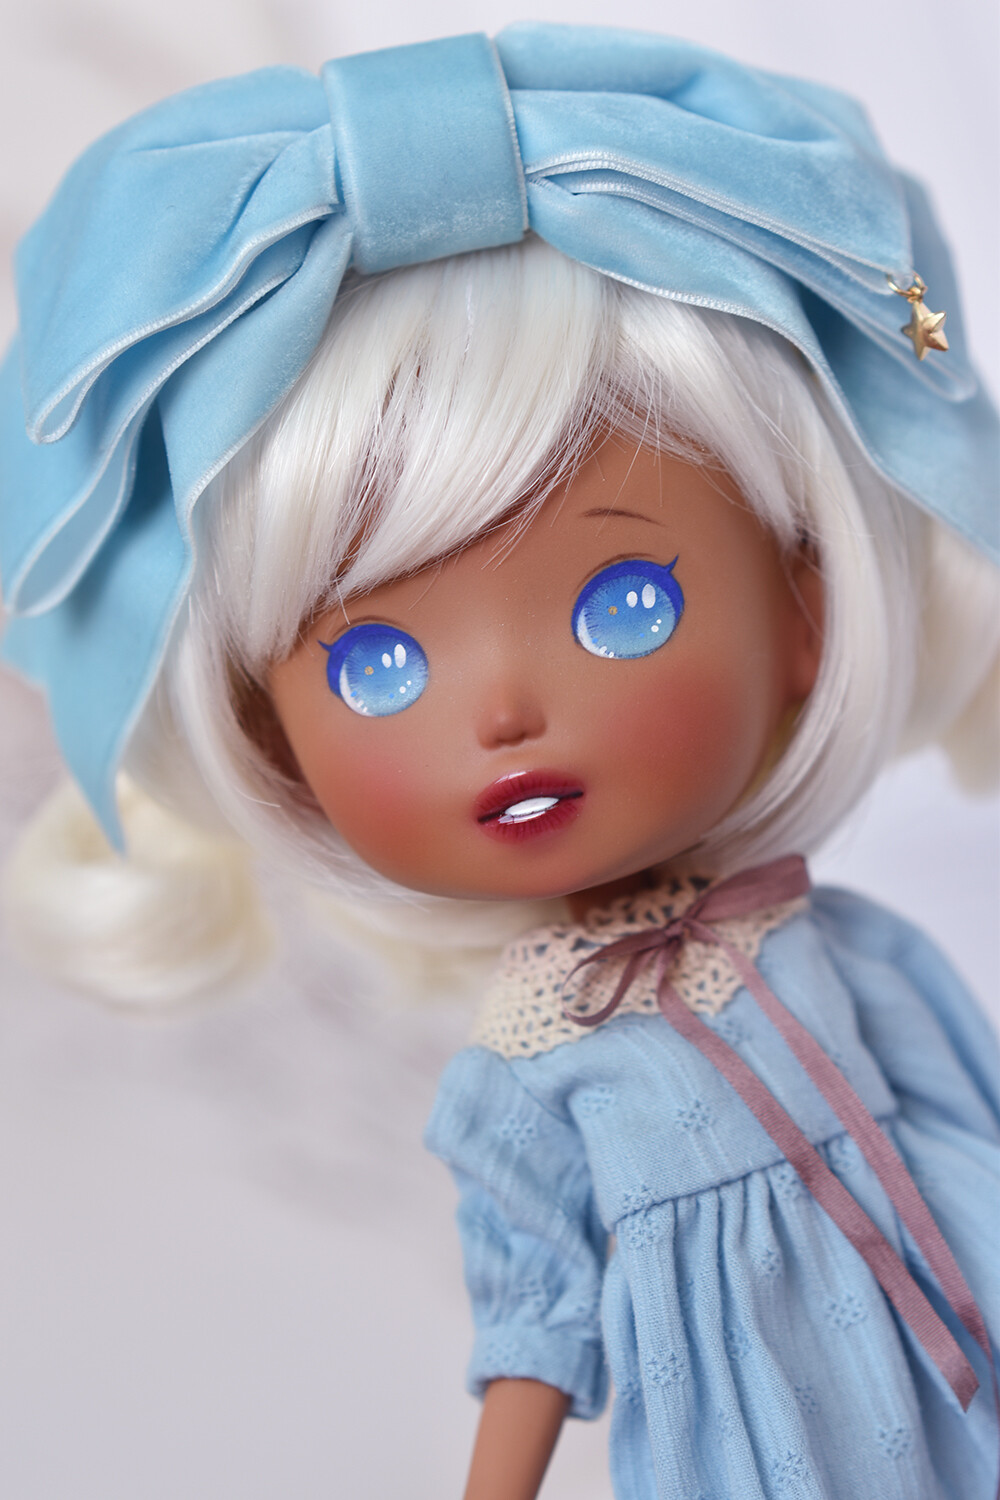 Mint Swirl Lollipop - Hime doll OOAK "Candy" Collection